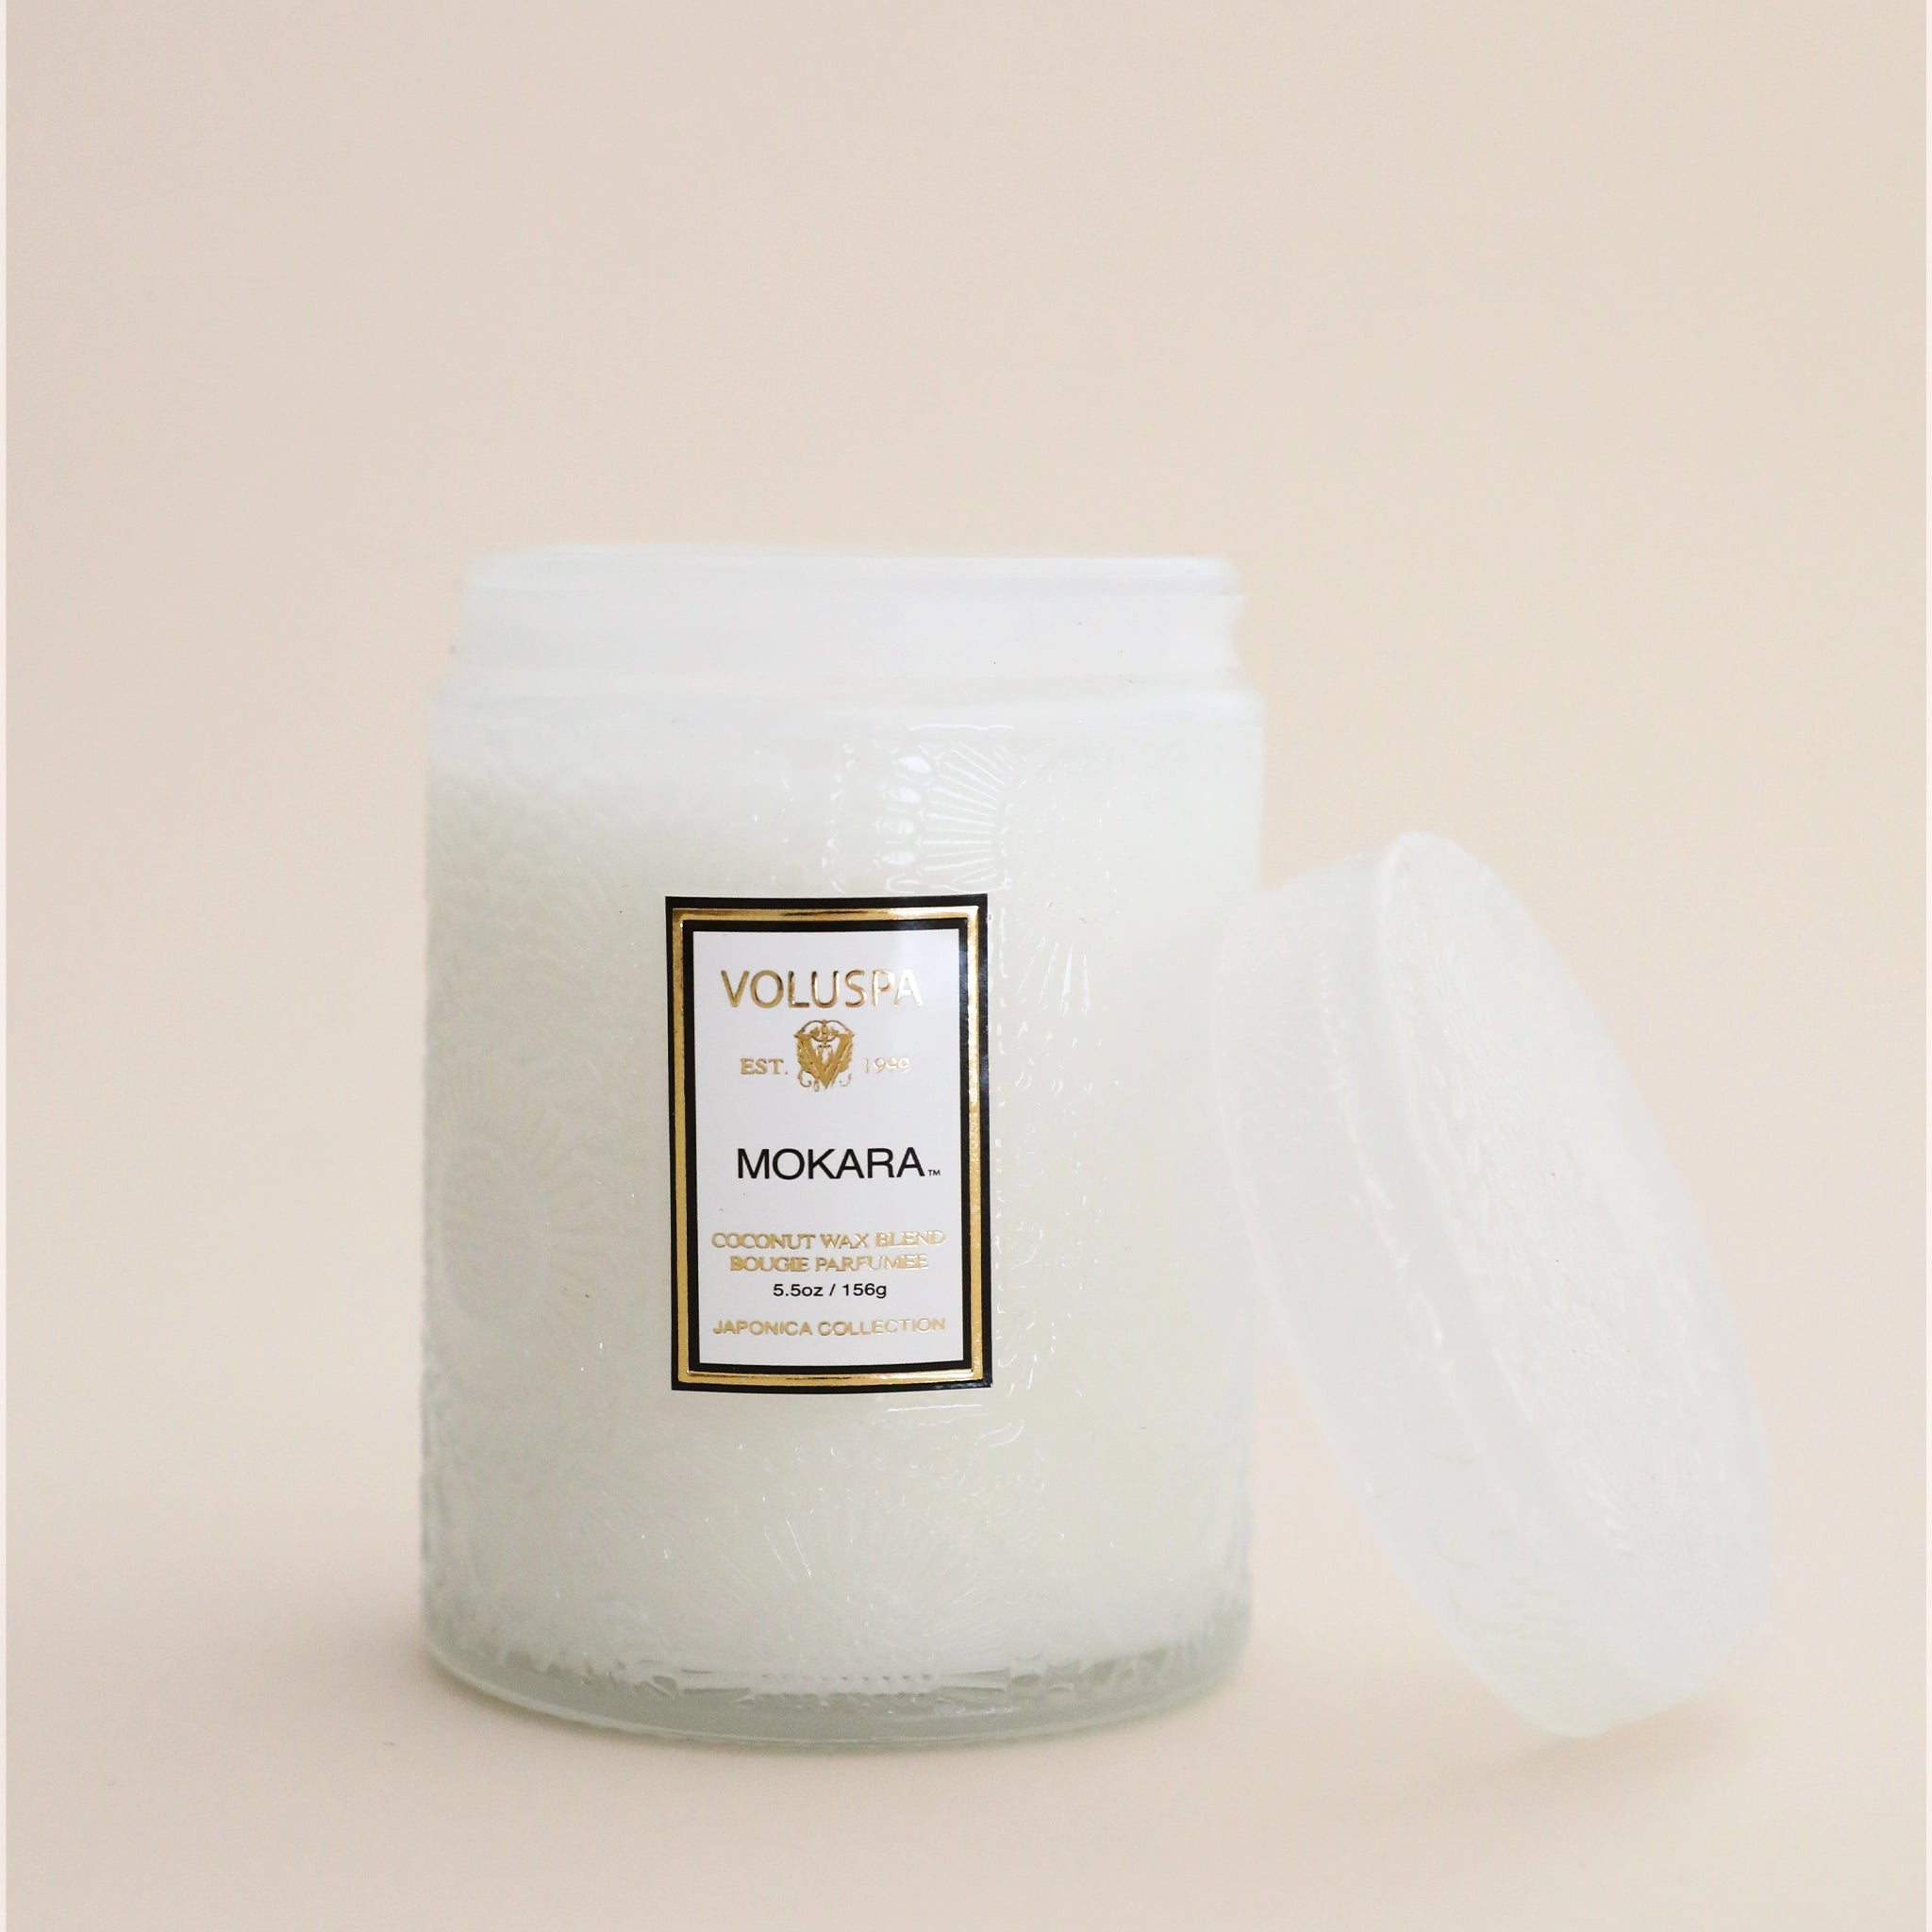 A decorative glass jar candle in a white color with a rectangular label on the front that reads, "Voluspa Mokara" with a coordinating decorative glass lid.